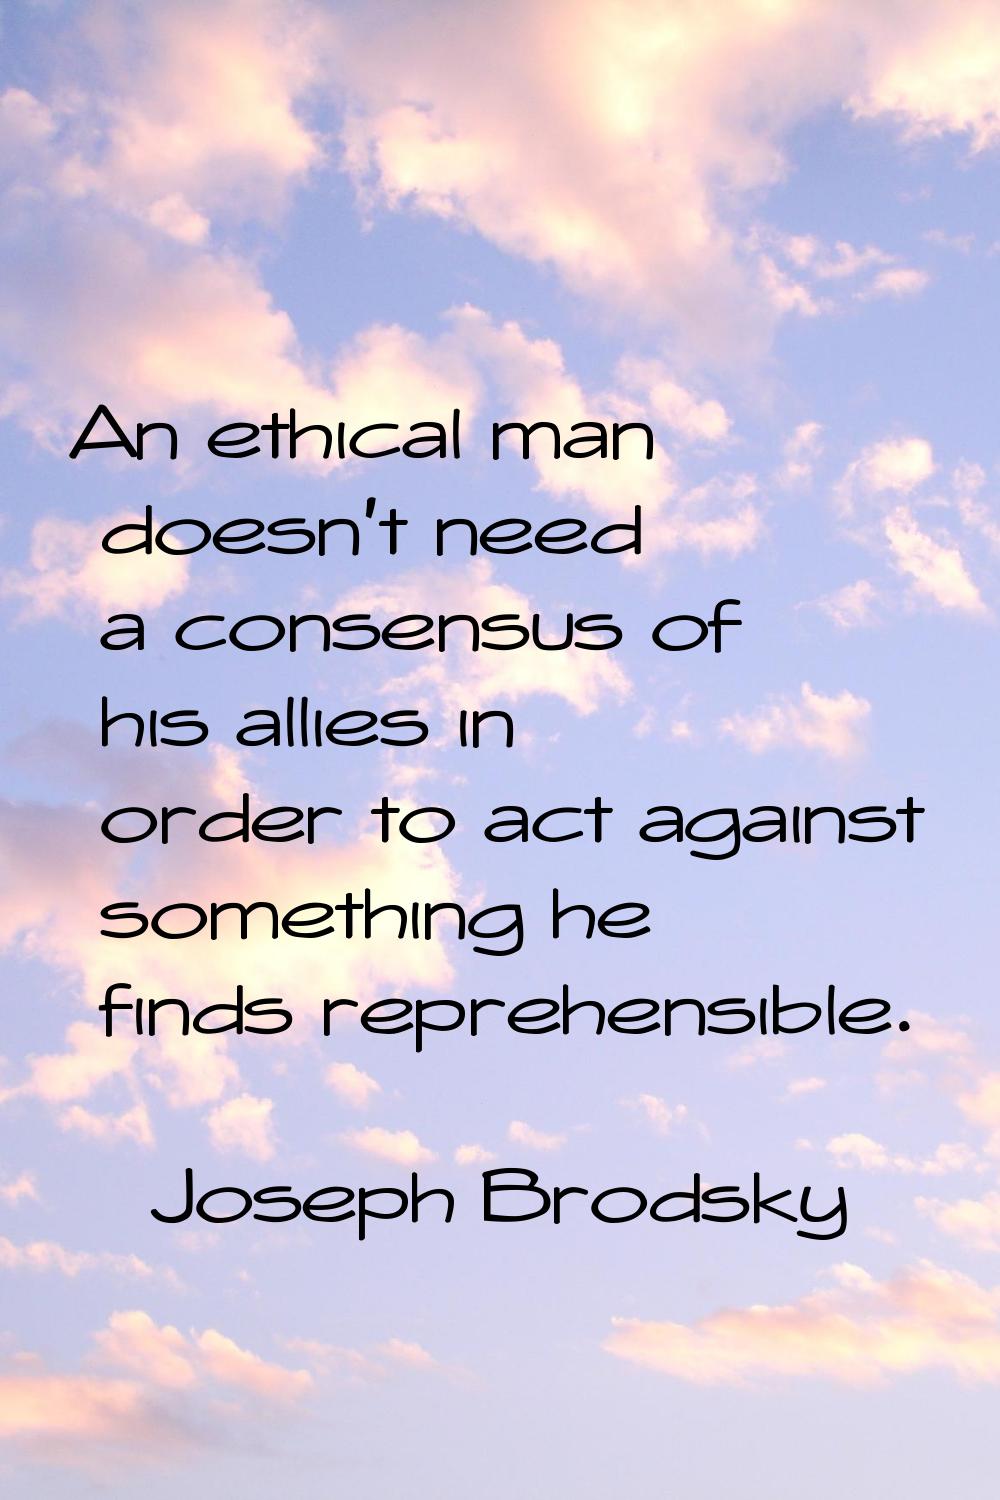 An ethical man doesn't need a consensus of his allies in order to act against something he finds re